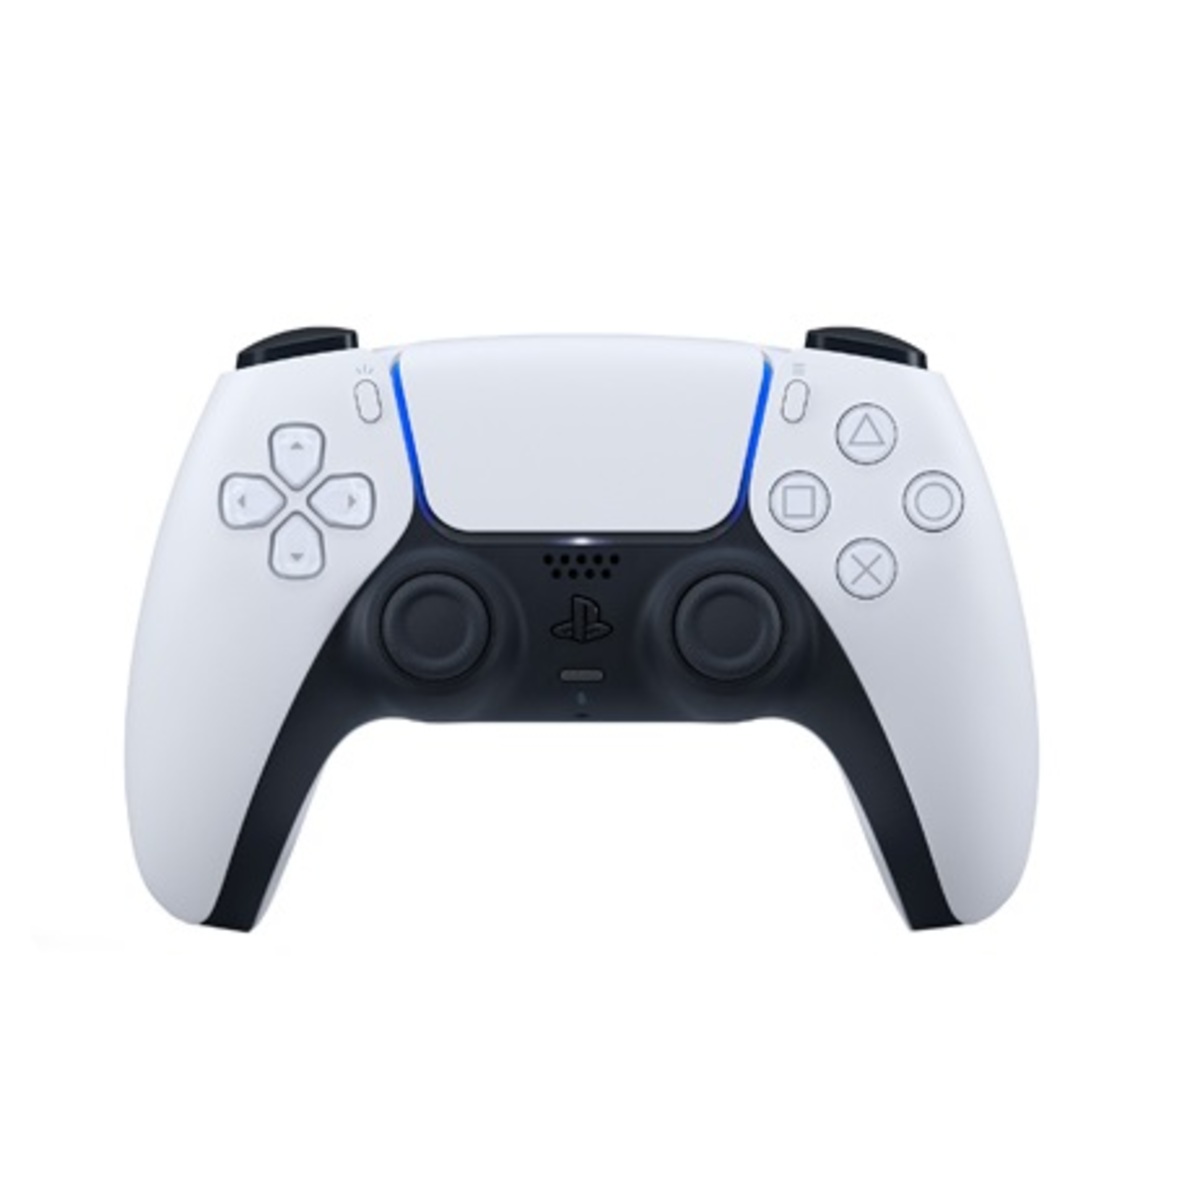 Sony PS5 Wireless Controller